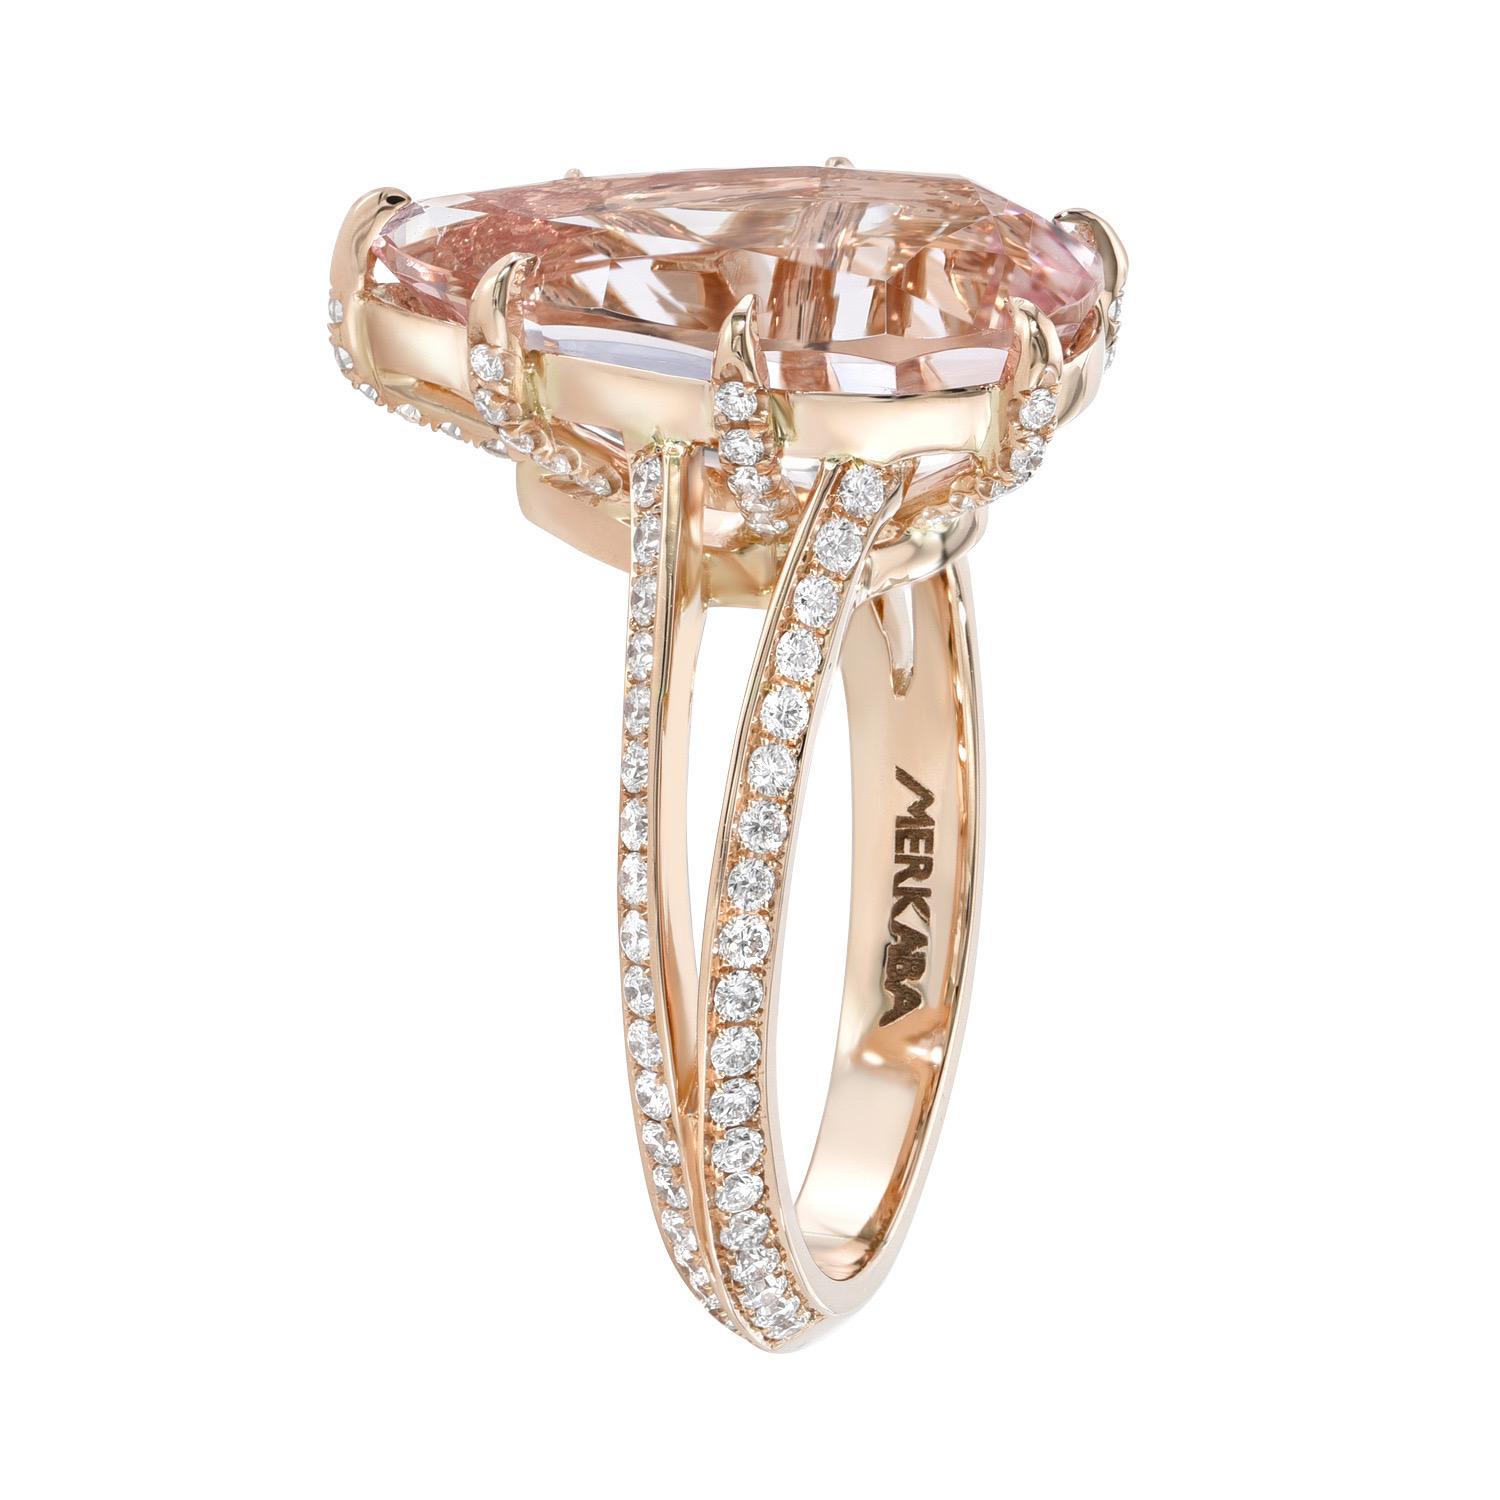 Remarkable 5.38 carat Morganite pear shape nestled in a magnificent 0.65 carat micro-pave, collection, diamond ring in 18K rose gold.
Ring size 6. Resizing is complementary upon request.
Crafted by extremely skilled hands in the USA.
Returns are